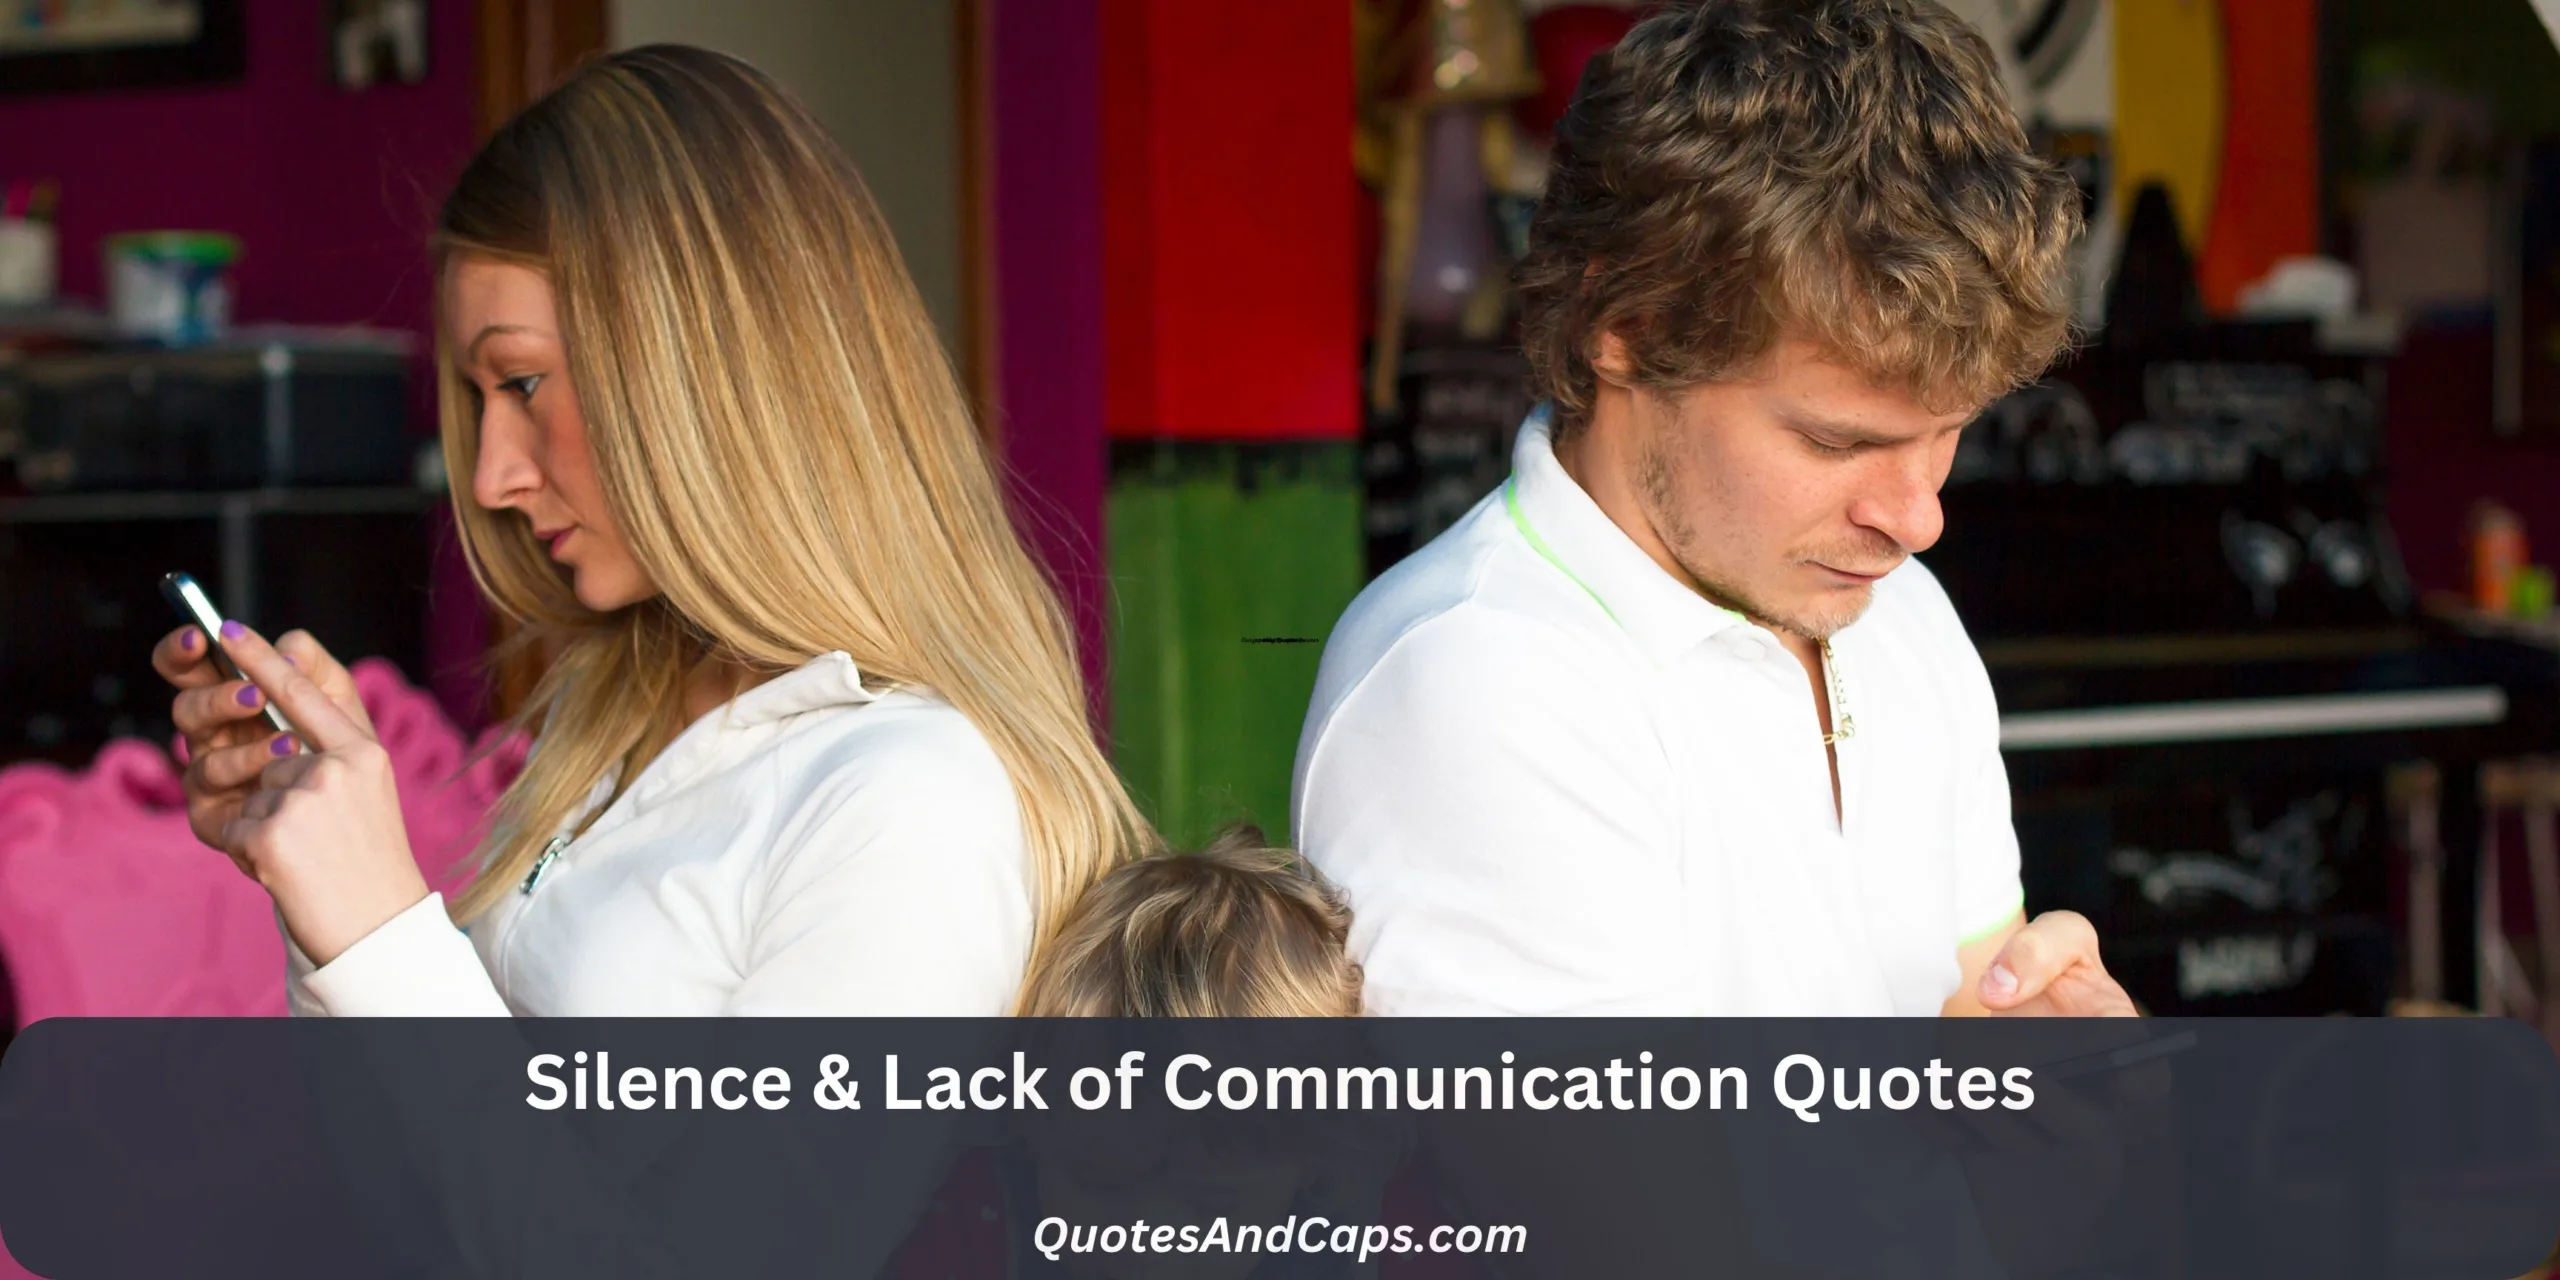 Silence & Lack of Communication Quotes